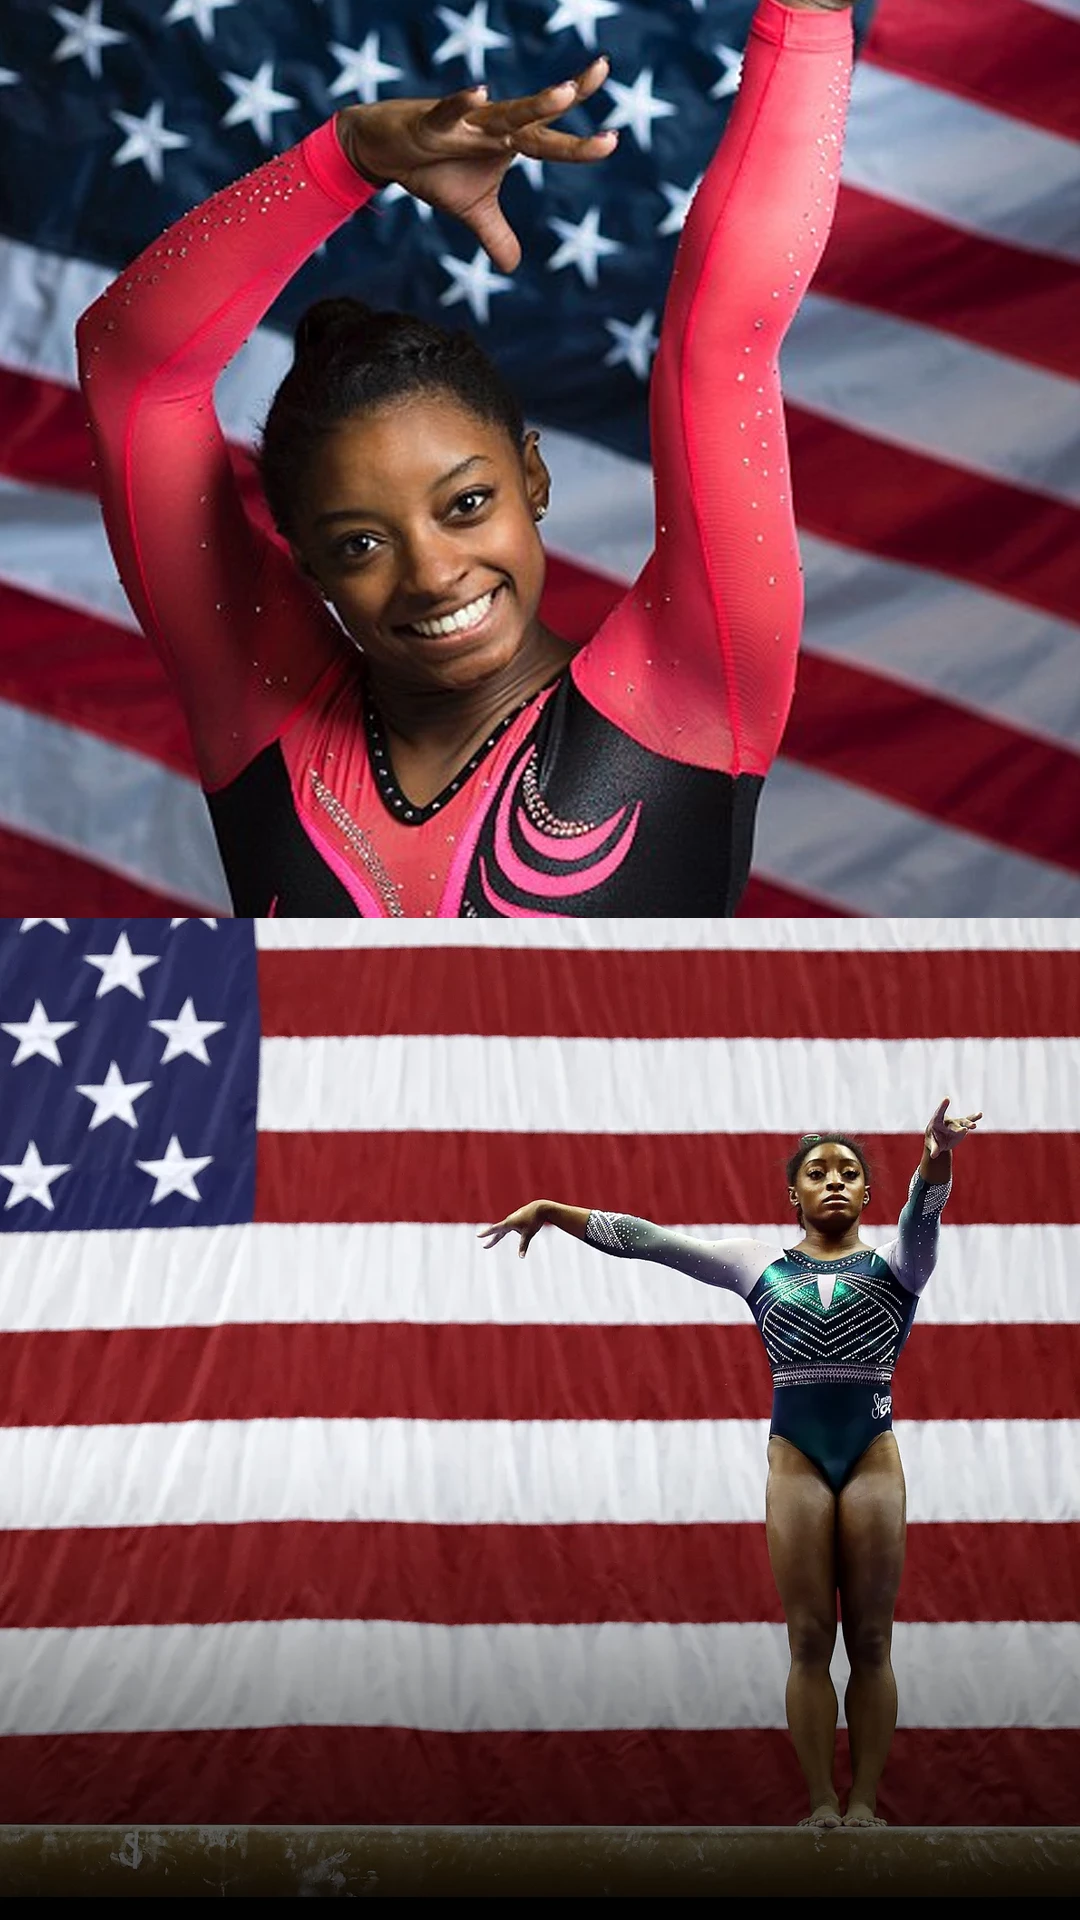 Simone Biles wins 20th world championships gold medal as US